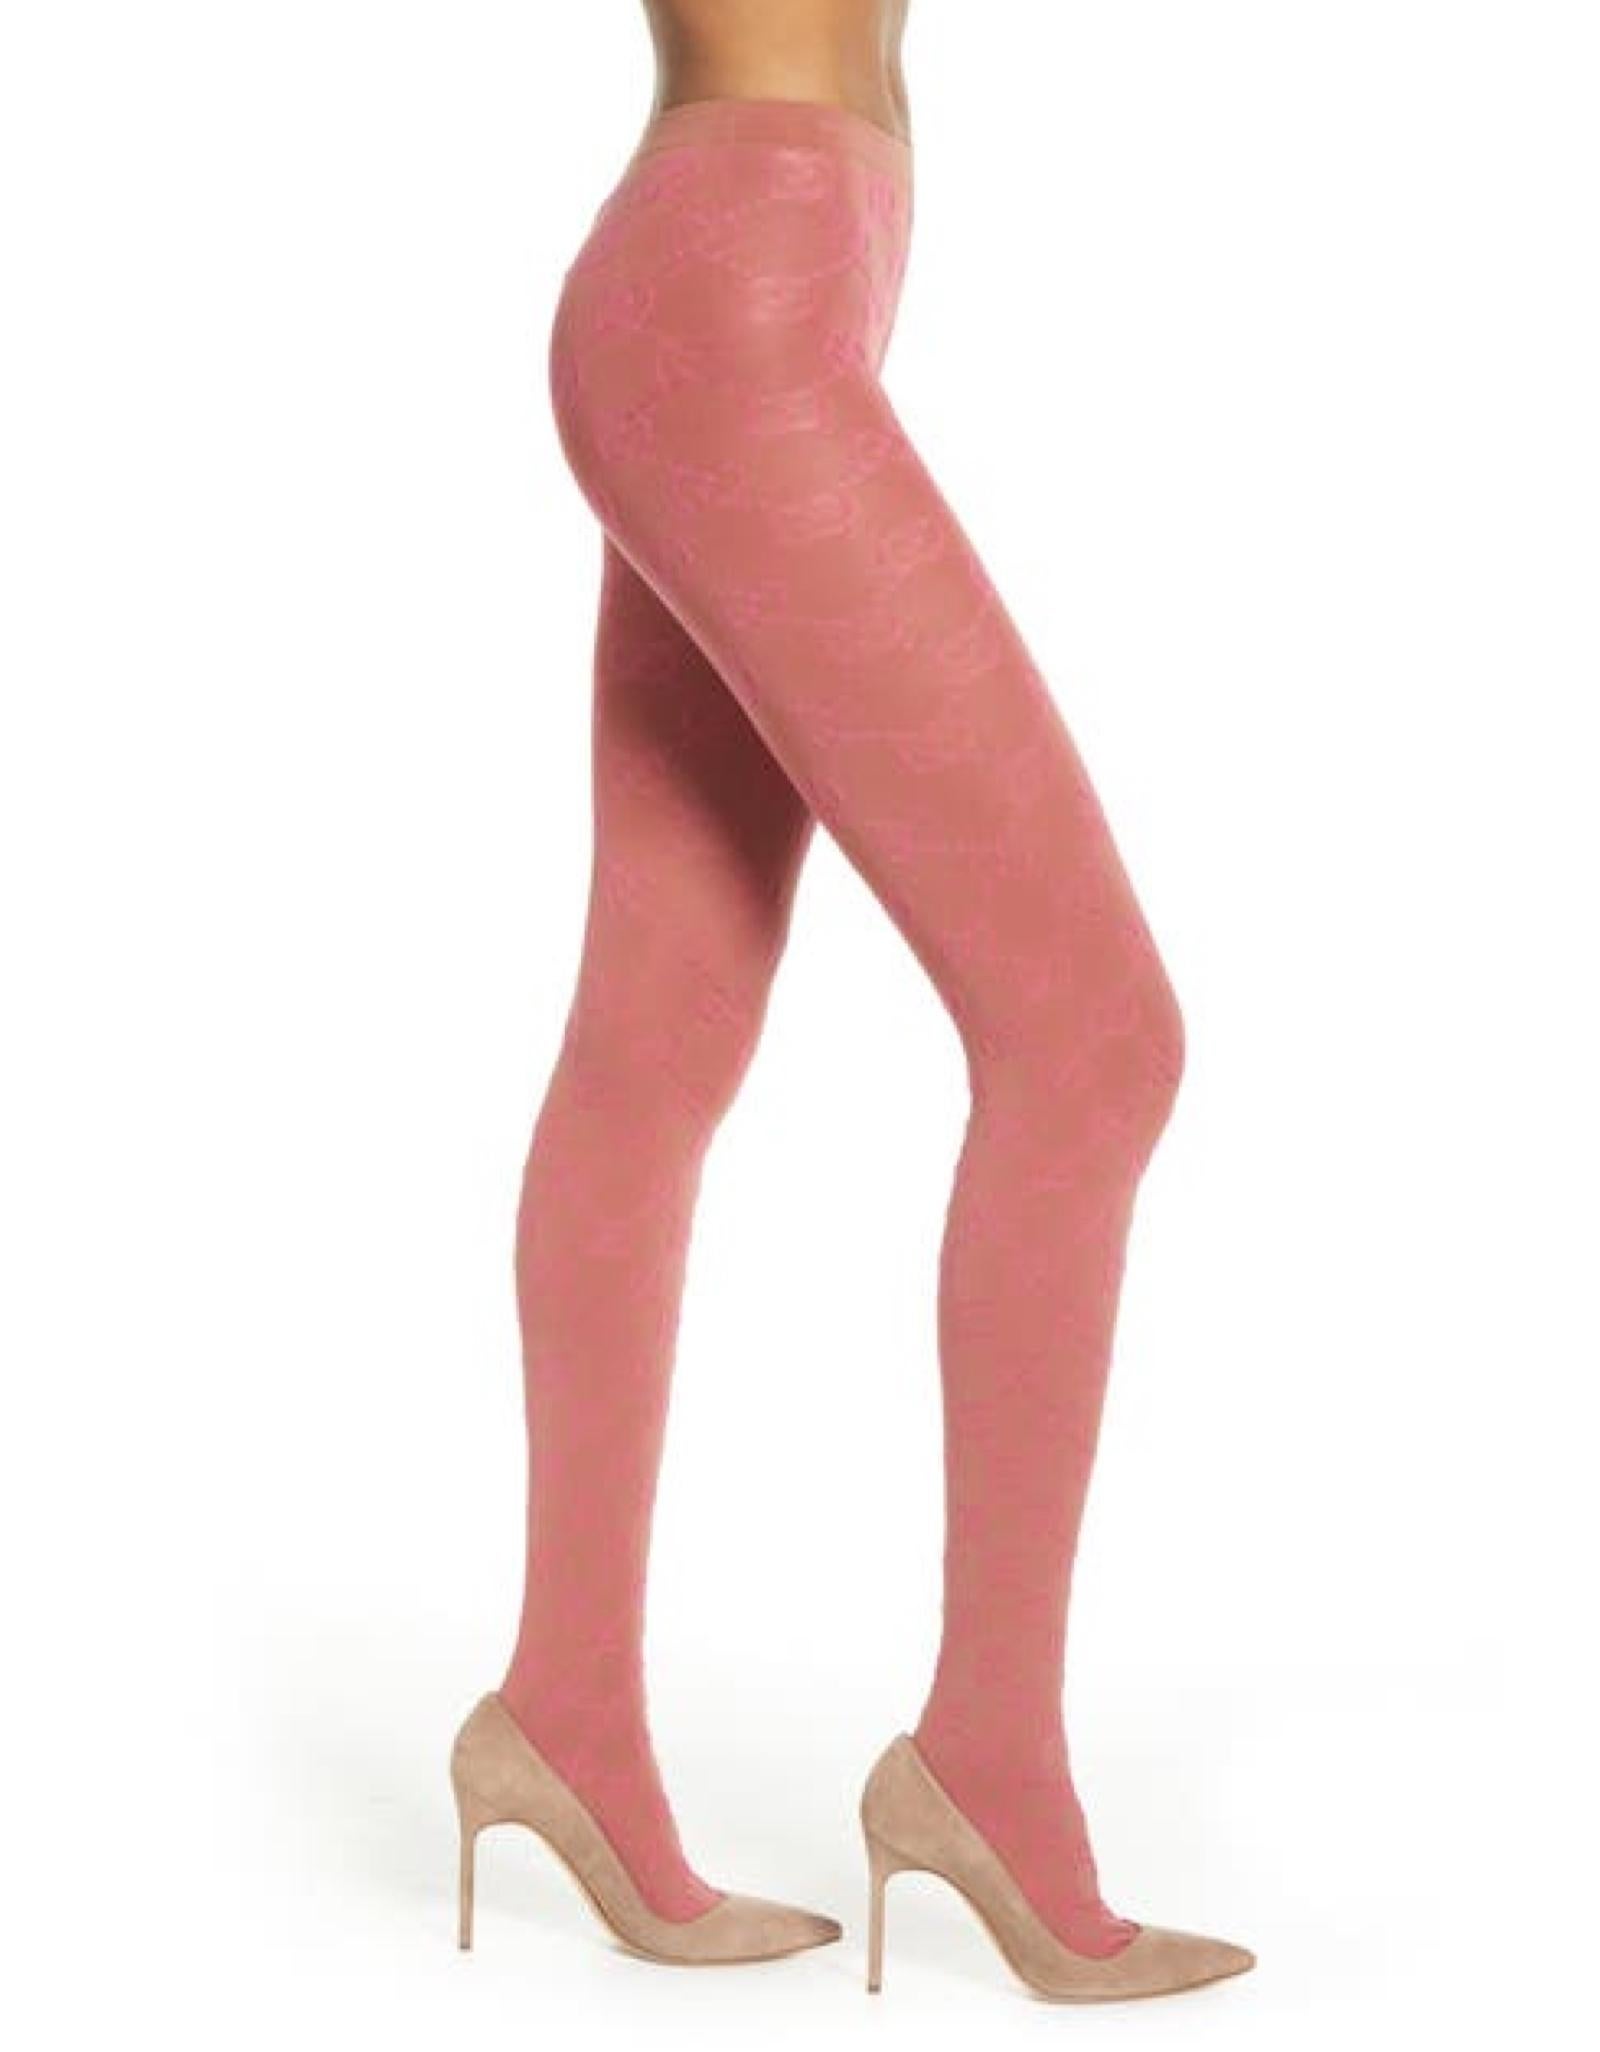 Gucci pink GG motif tulle tight/stockings featuring an elasticated waistband, a stretch fit and a GG pattern all-over.

COLOR: Pink
MATERIAL: 39% polyamide, 8% Elastan, Polypropylene 53%
SIZE: Small
ITEM CODE: 600467
COMES WITH: Box, original